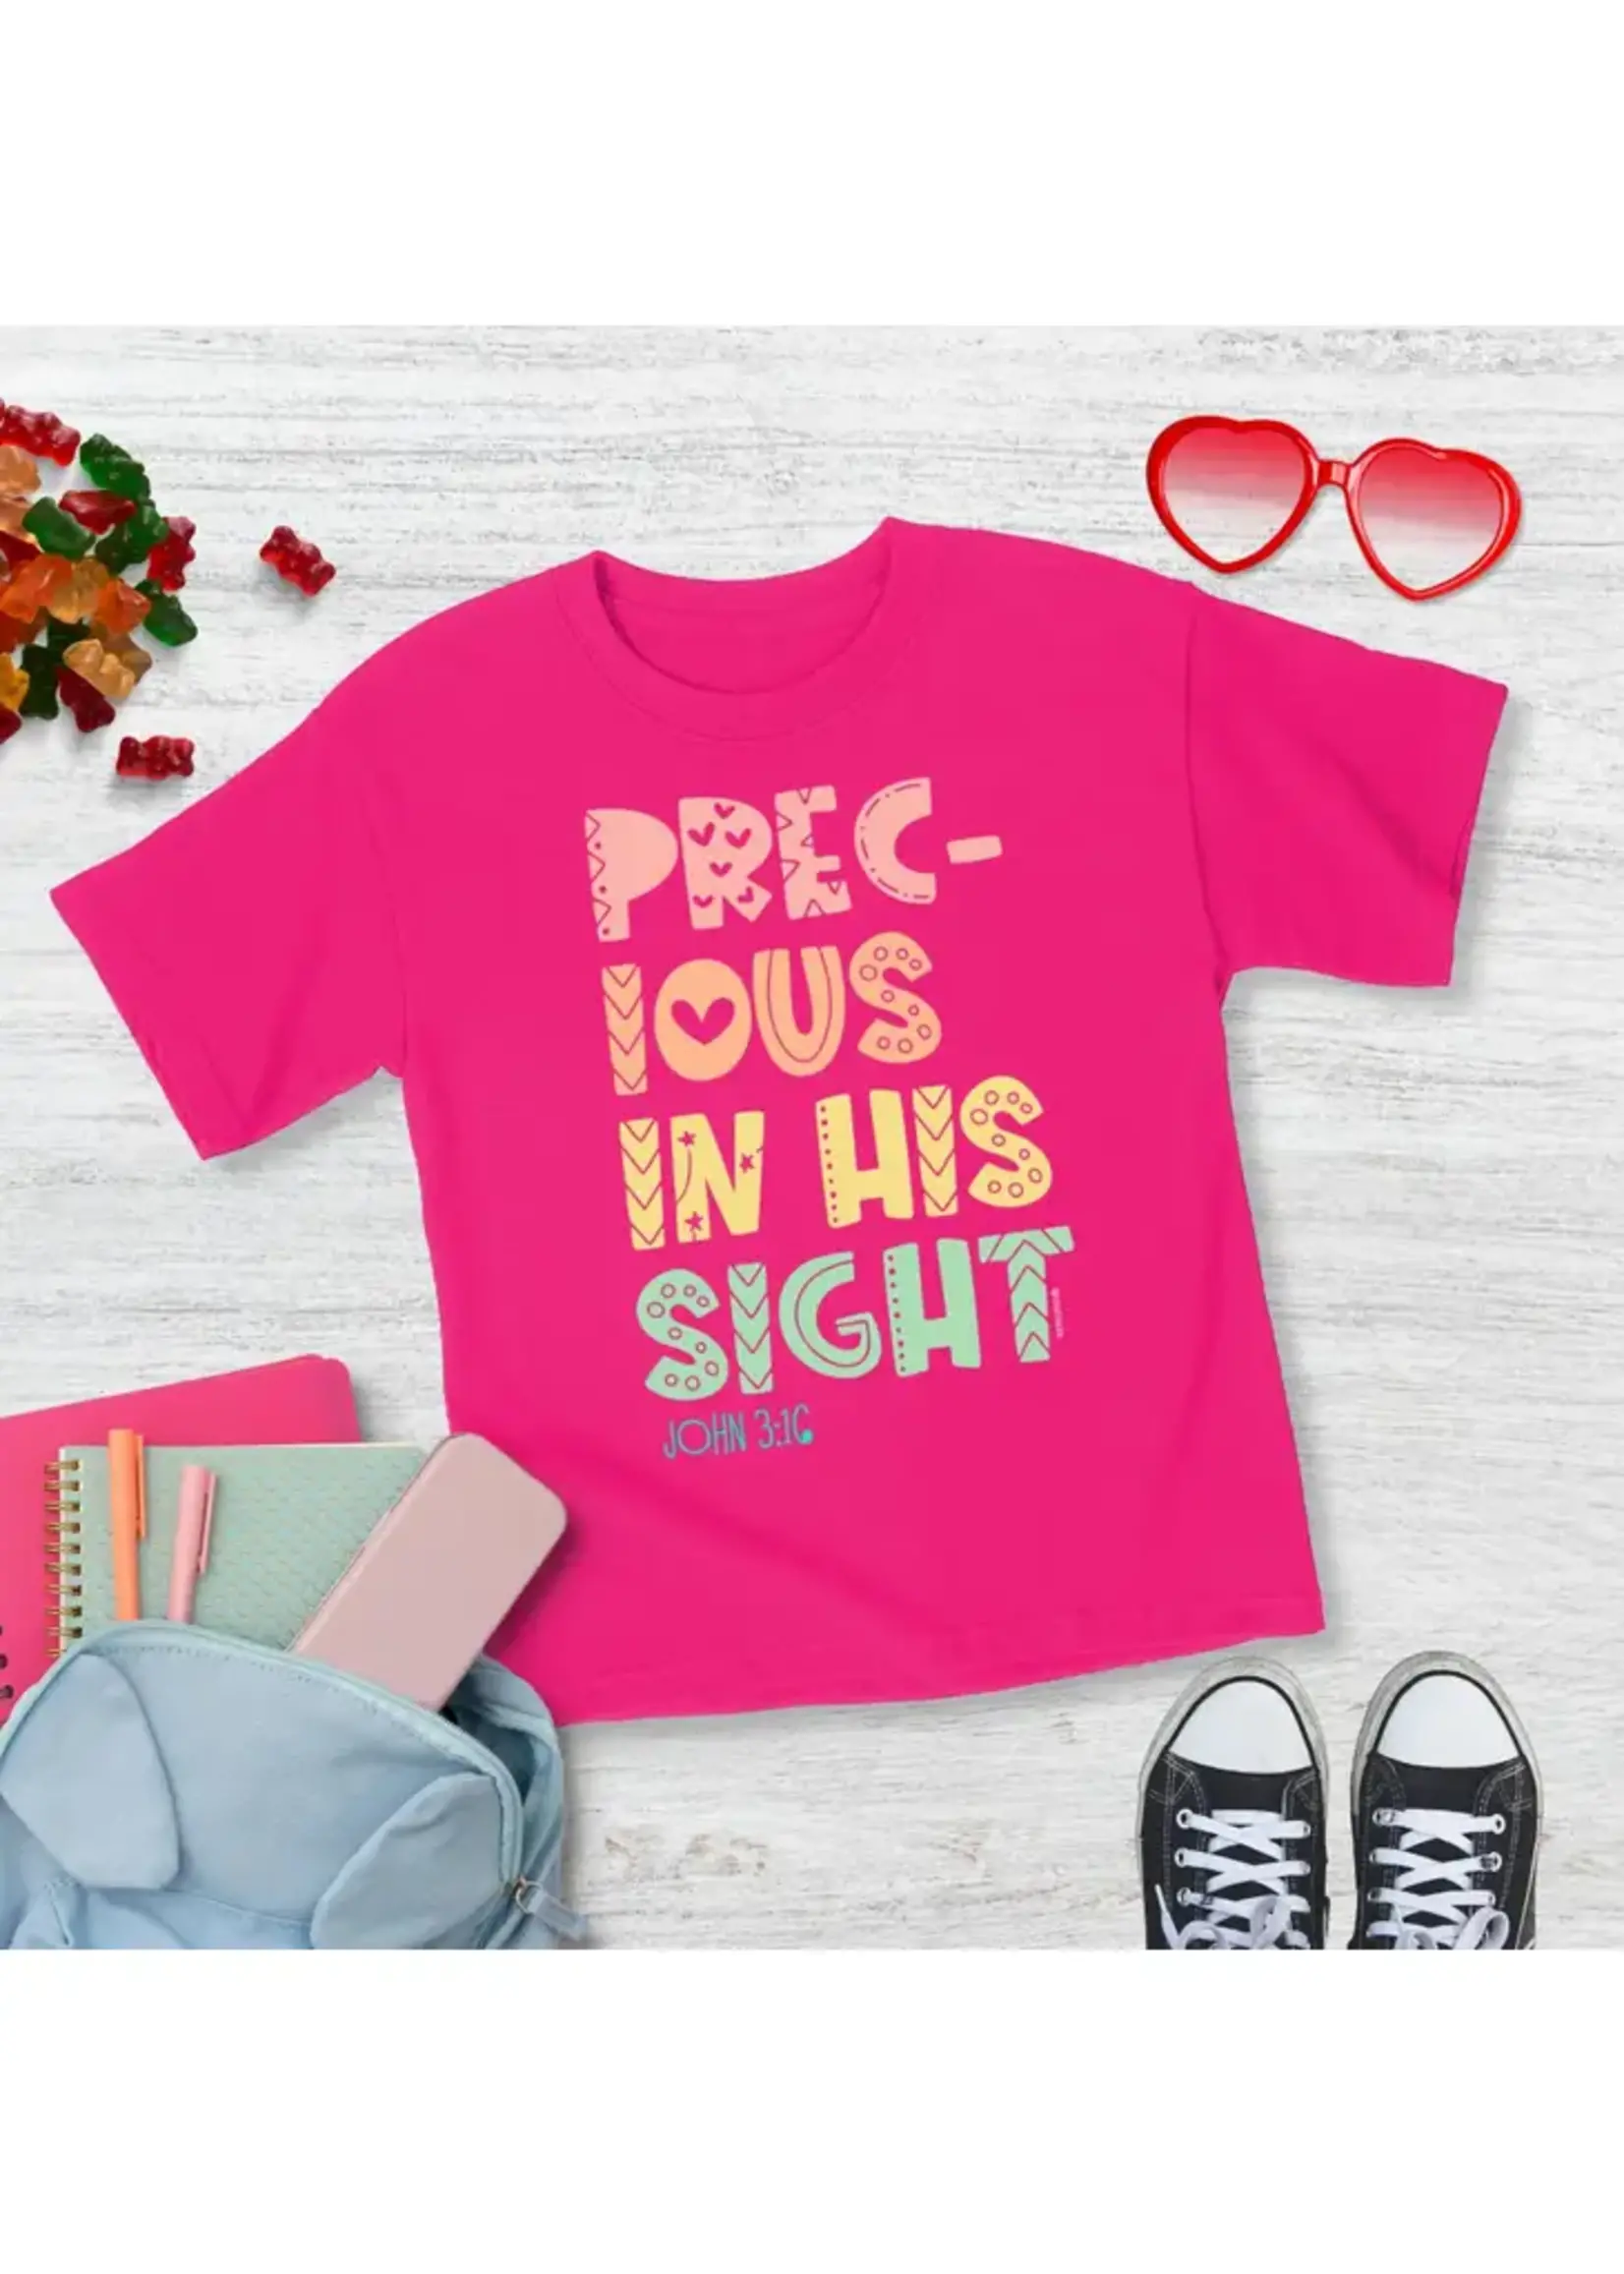 "Precious in His Sight" Girls Graphic Tee